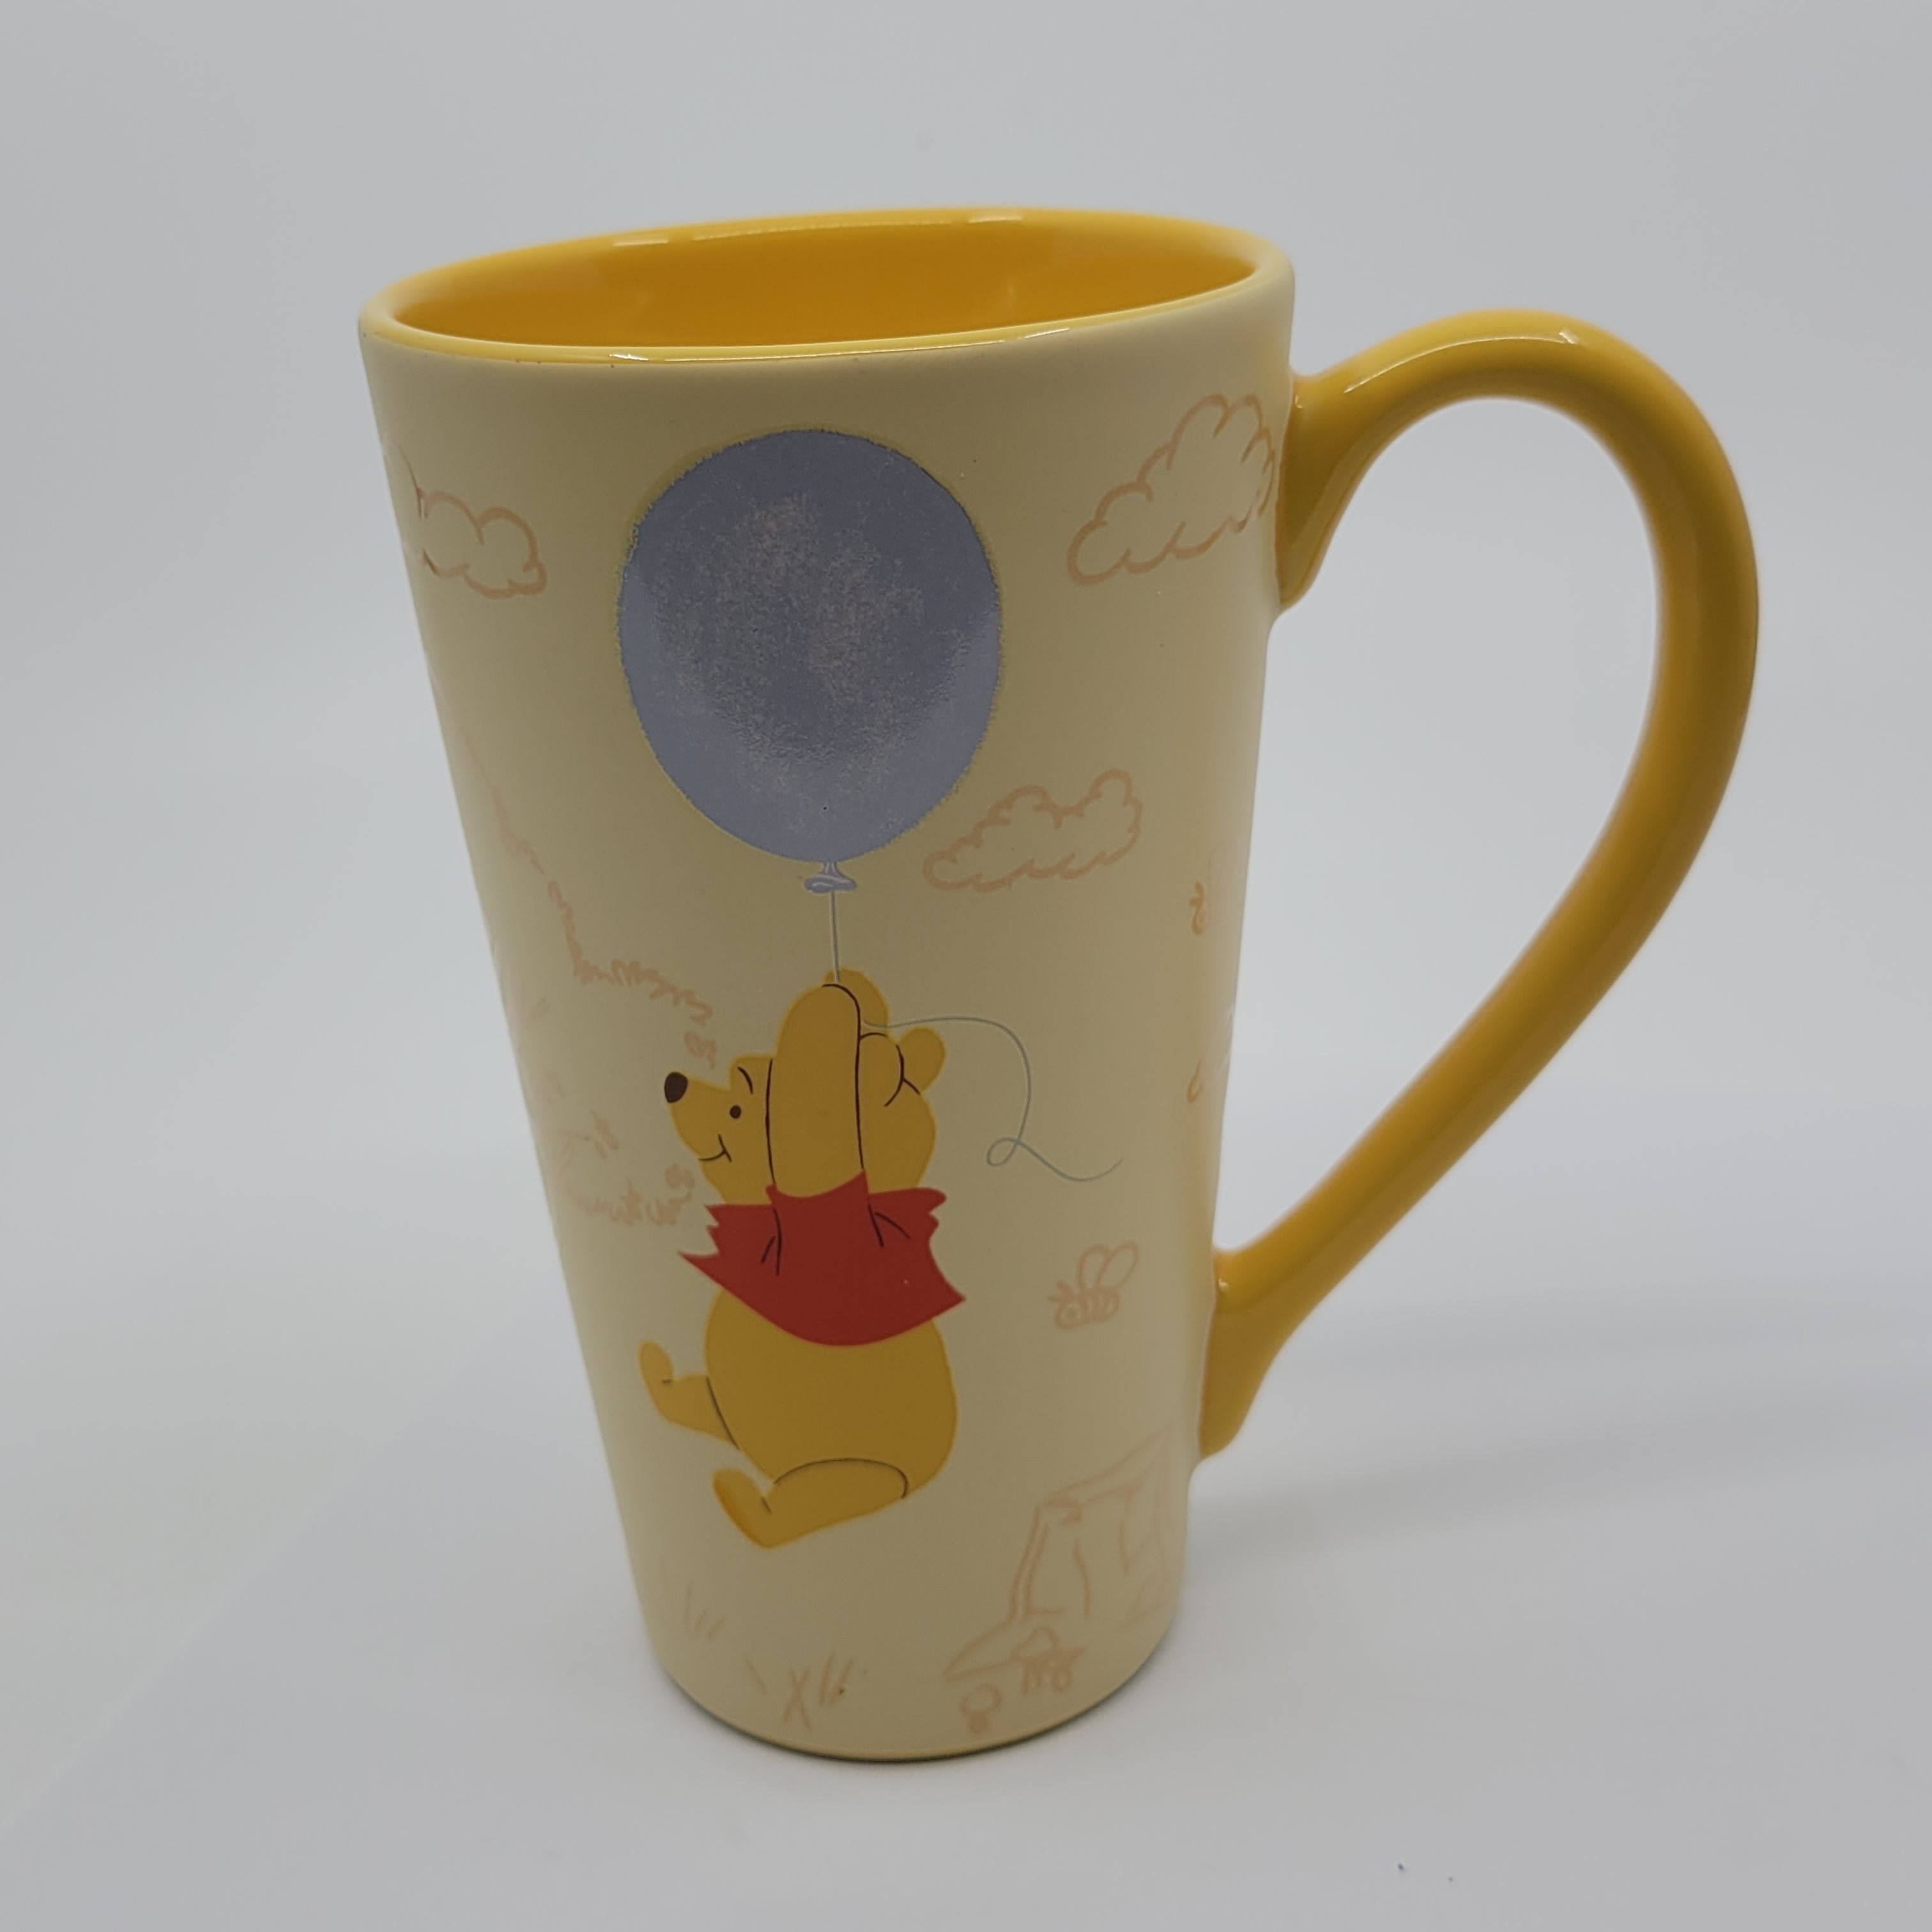 Disney Store Winnie the Pooh Tall Coffee Mug Cup 6 Inches Tall - Pooh & Balloon. Pre-owned, good shape - chips or cracks.